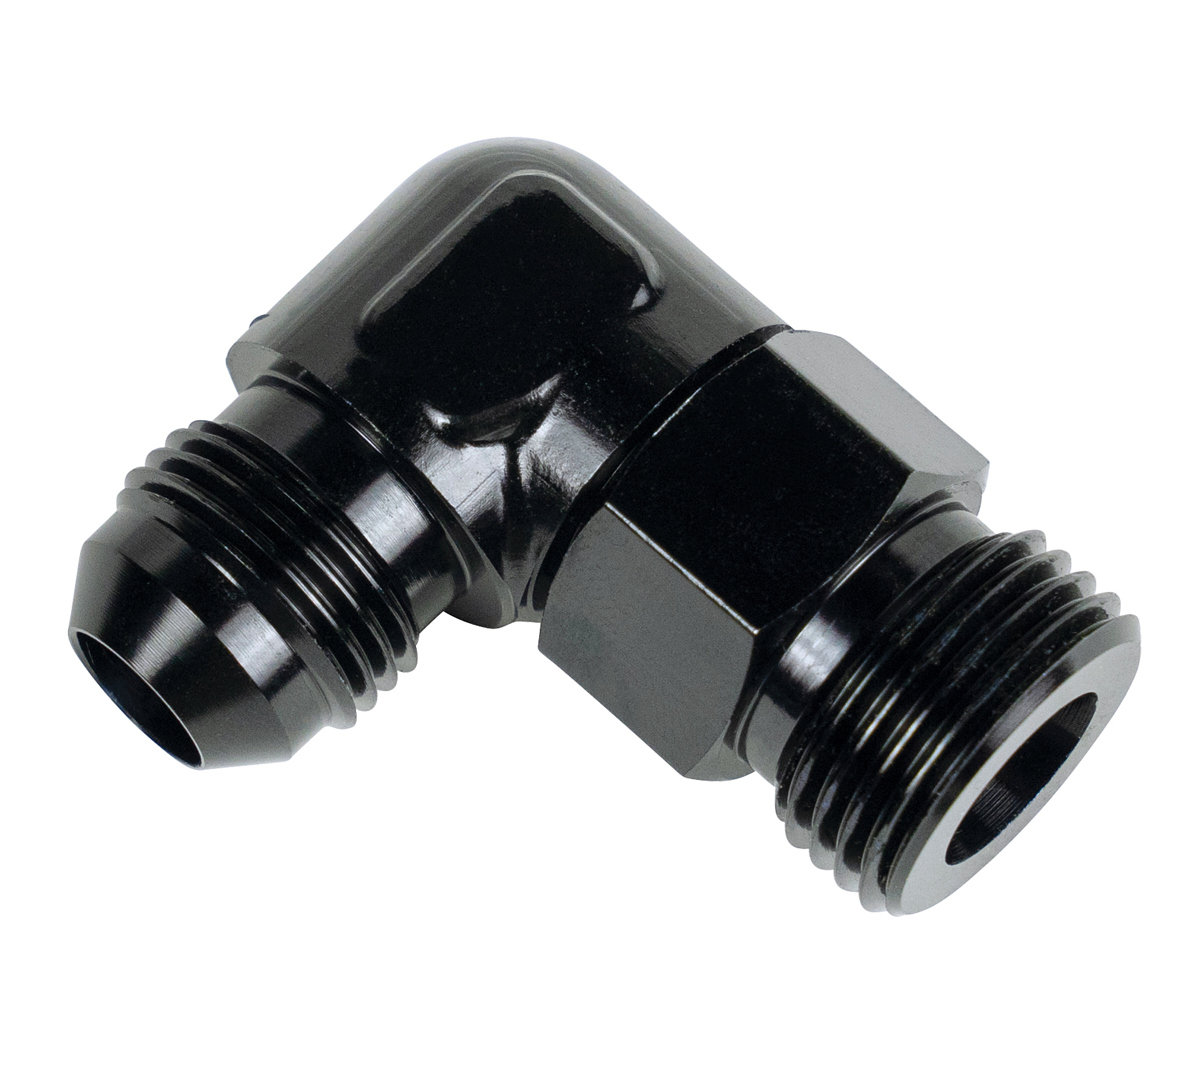 Derale 59506 Fitting, Adapter, 90 Degree, 7/8-14 in NPT Male to 6 AN Male O-Ring, Aluminum, Black Anodized, Each